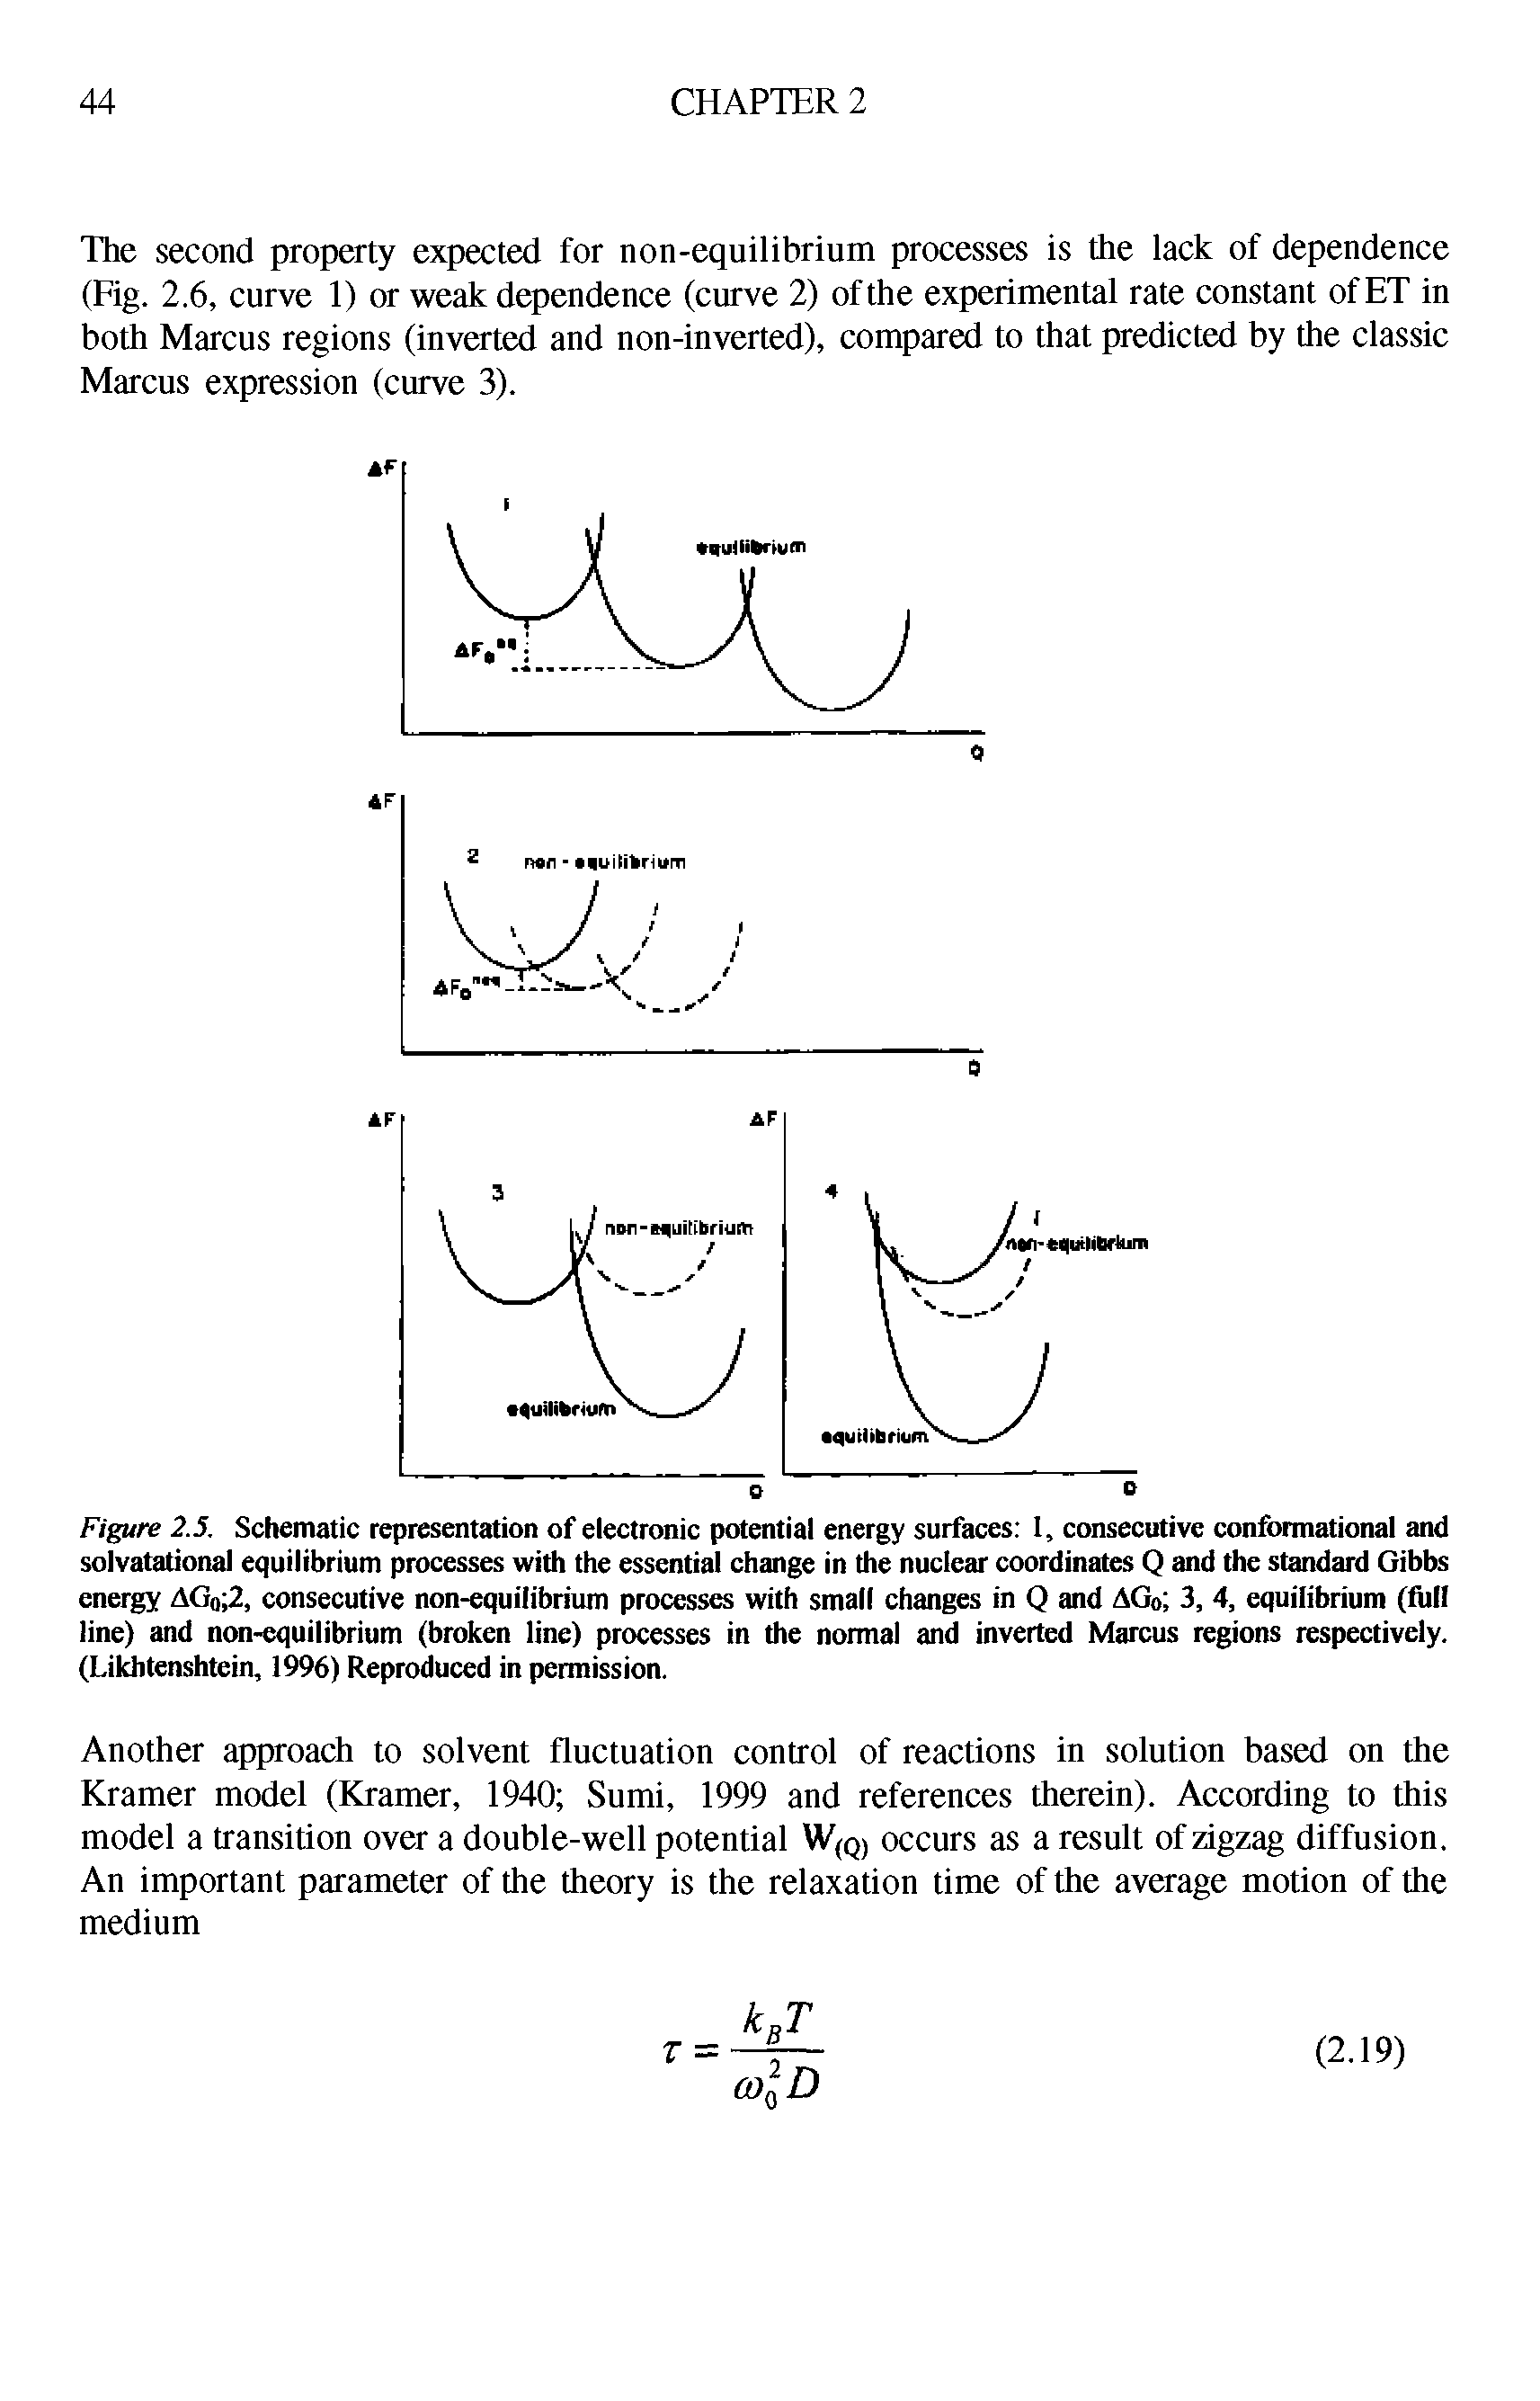 Figure 2.5. Schematic representation of electronic potential energy surfaces 1, consecutive conformational and solvatational equilibrium processes with the essential change in the nuclear coordinates Q and the standard Gibbs energy AG0 2, consecutive non-equilibrium processes with small changes in Q and AG0 3, 4, equilibrium (full line) and non-equilibrium (broken line) processes in the normal and inverted Marcus regions respectively. (Likhtenshtein, 1996) Reproduced in permission.